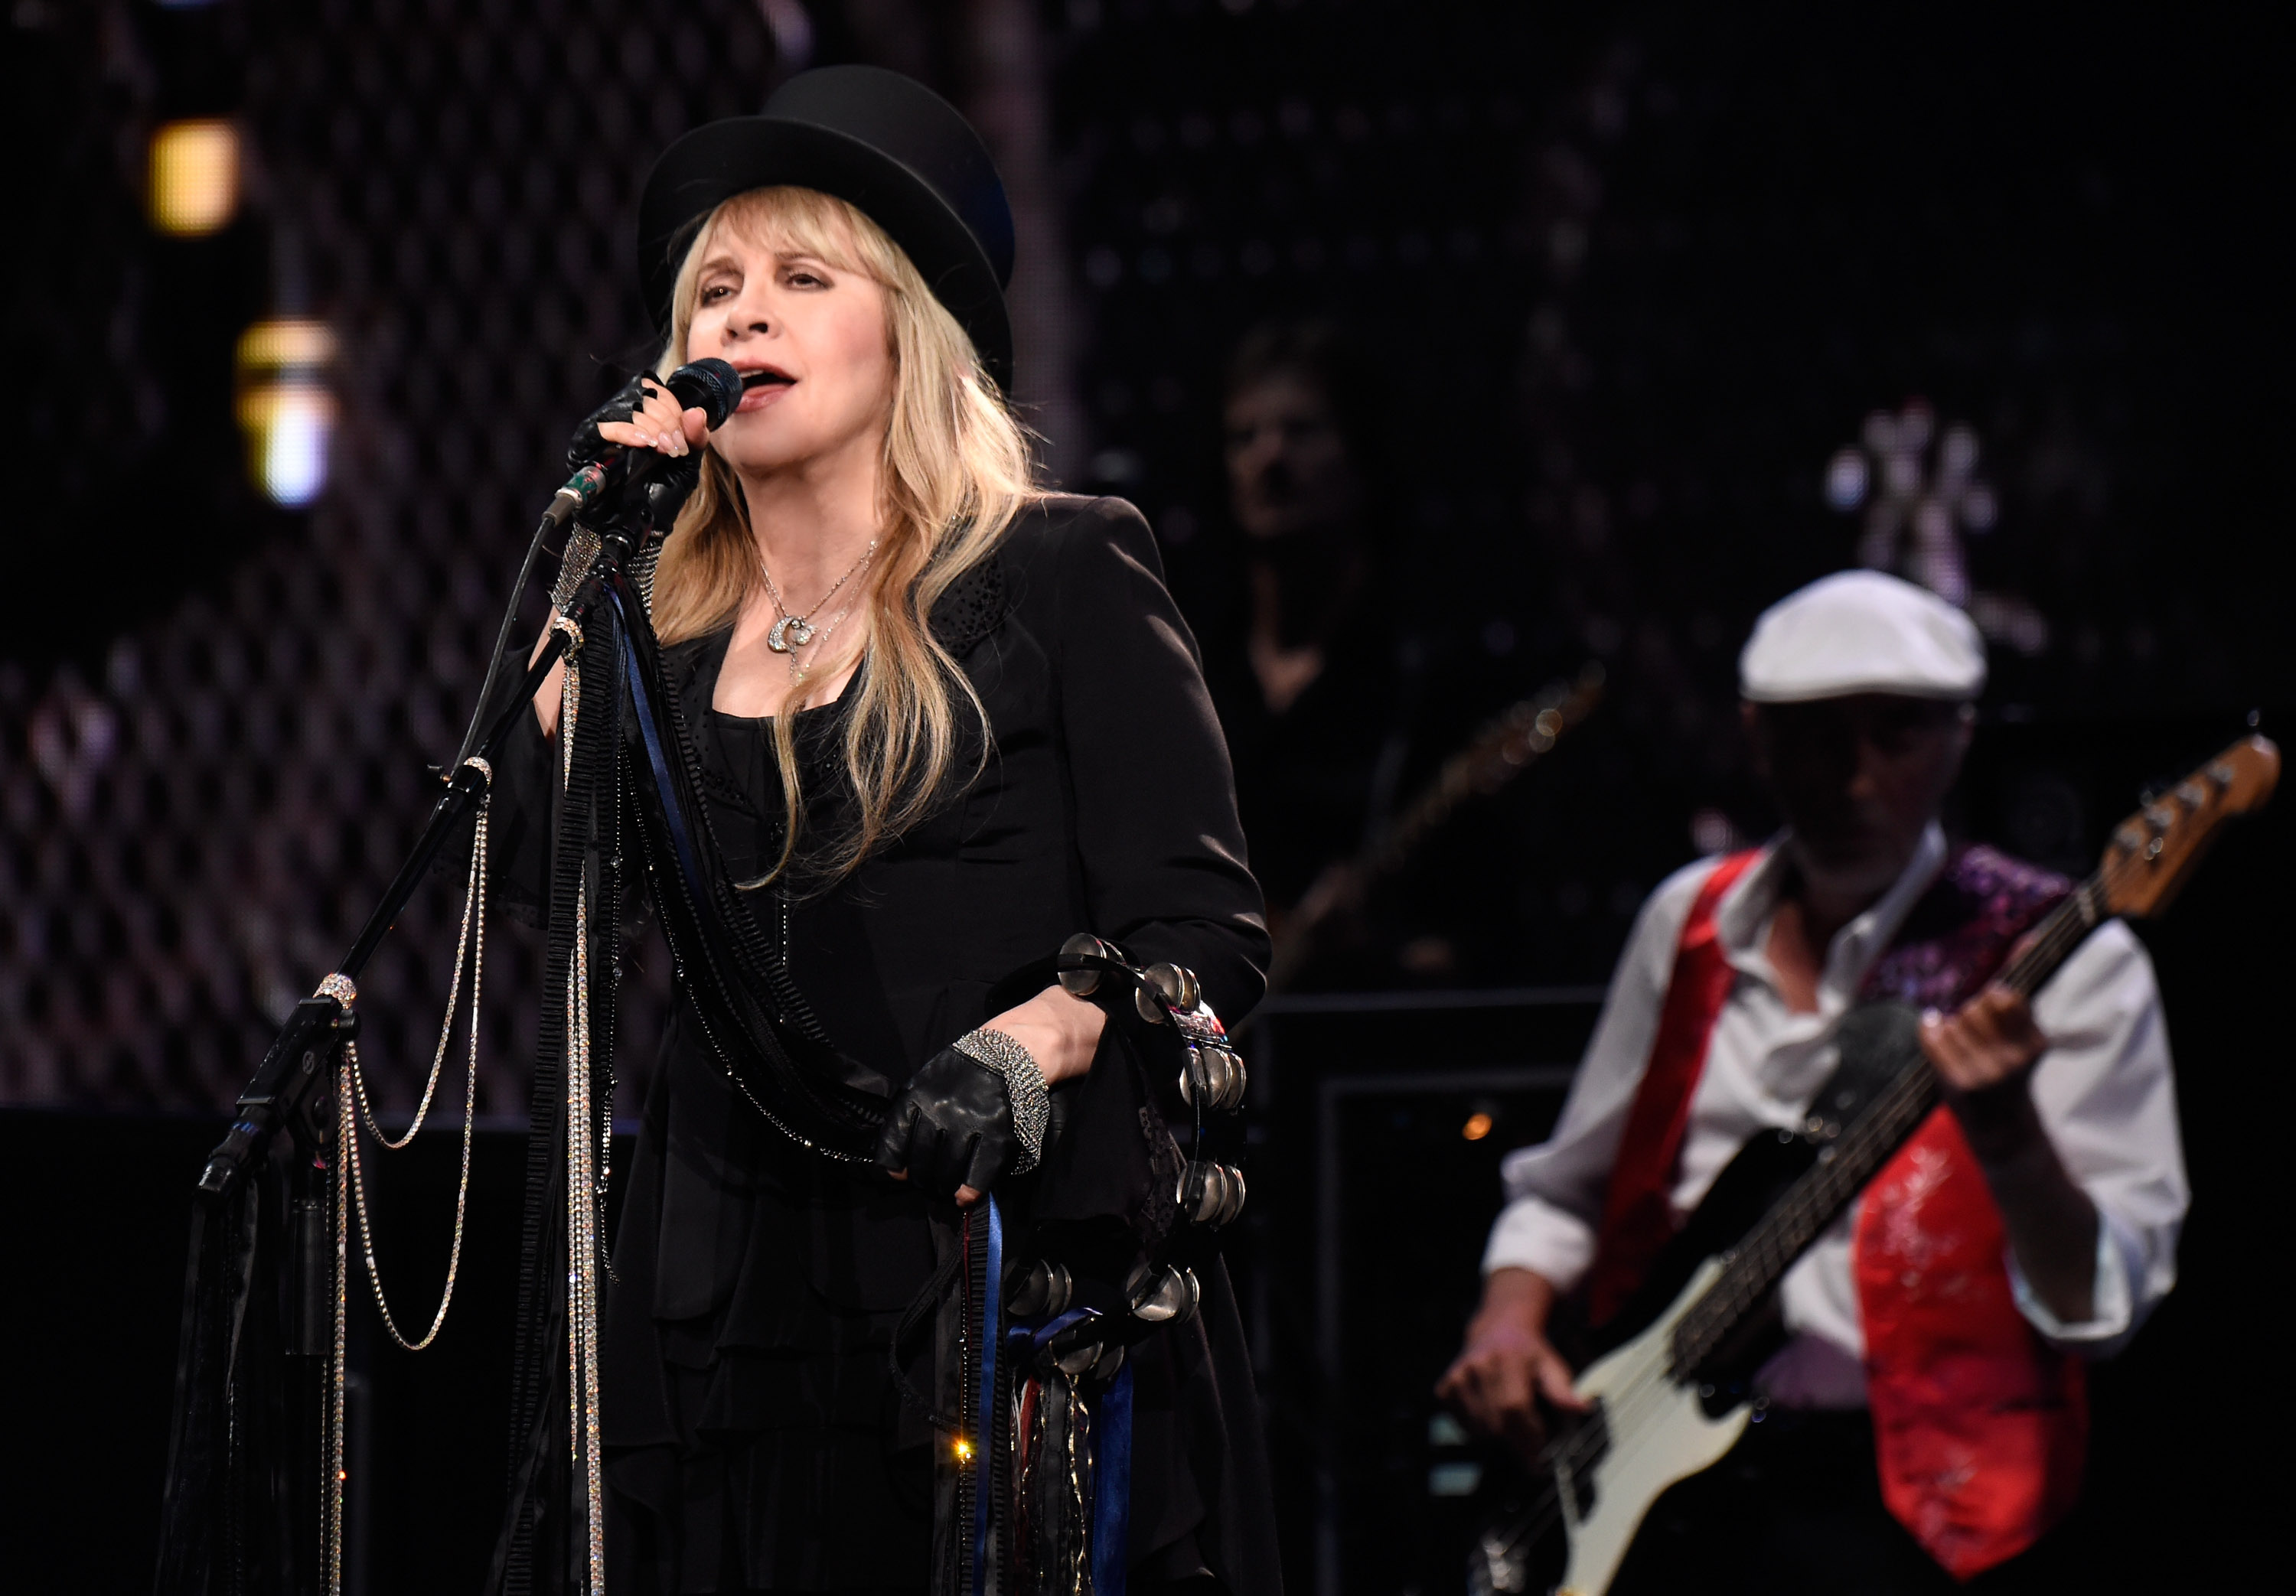 Stevie Nicks performs at Madison Square Garden on October 7, 2014 in New York City. (Kevin Mazur—WireImage)